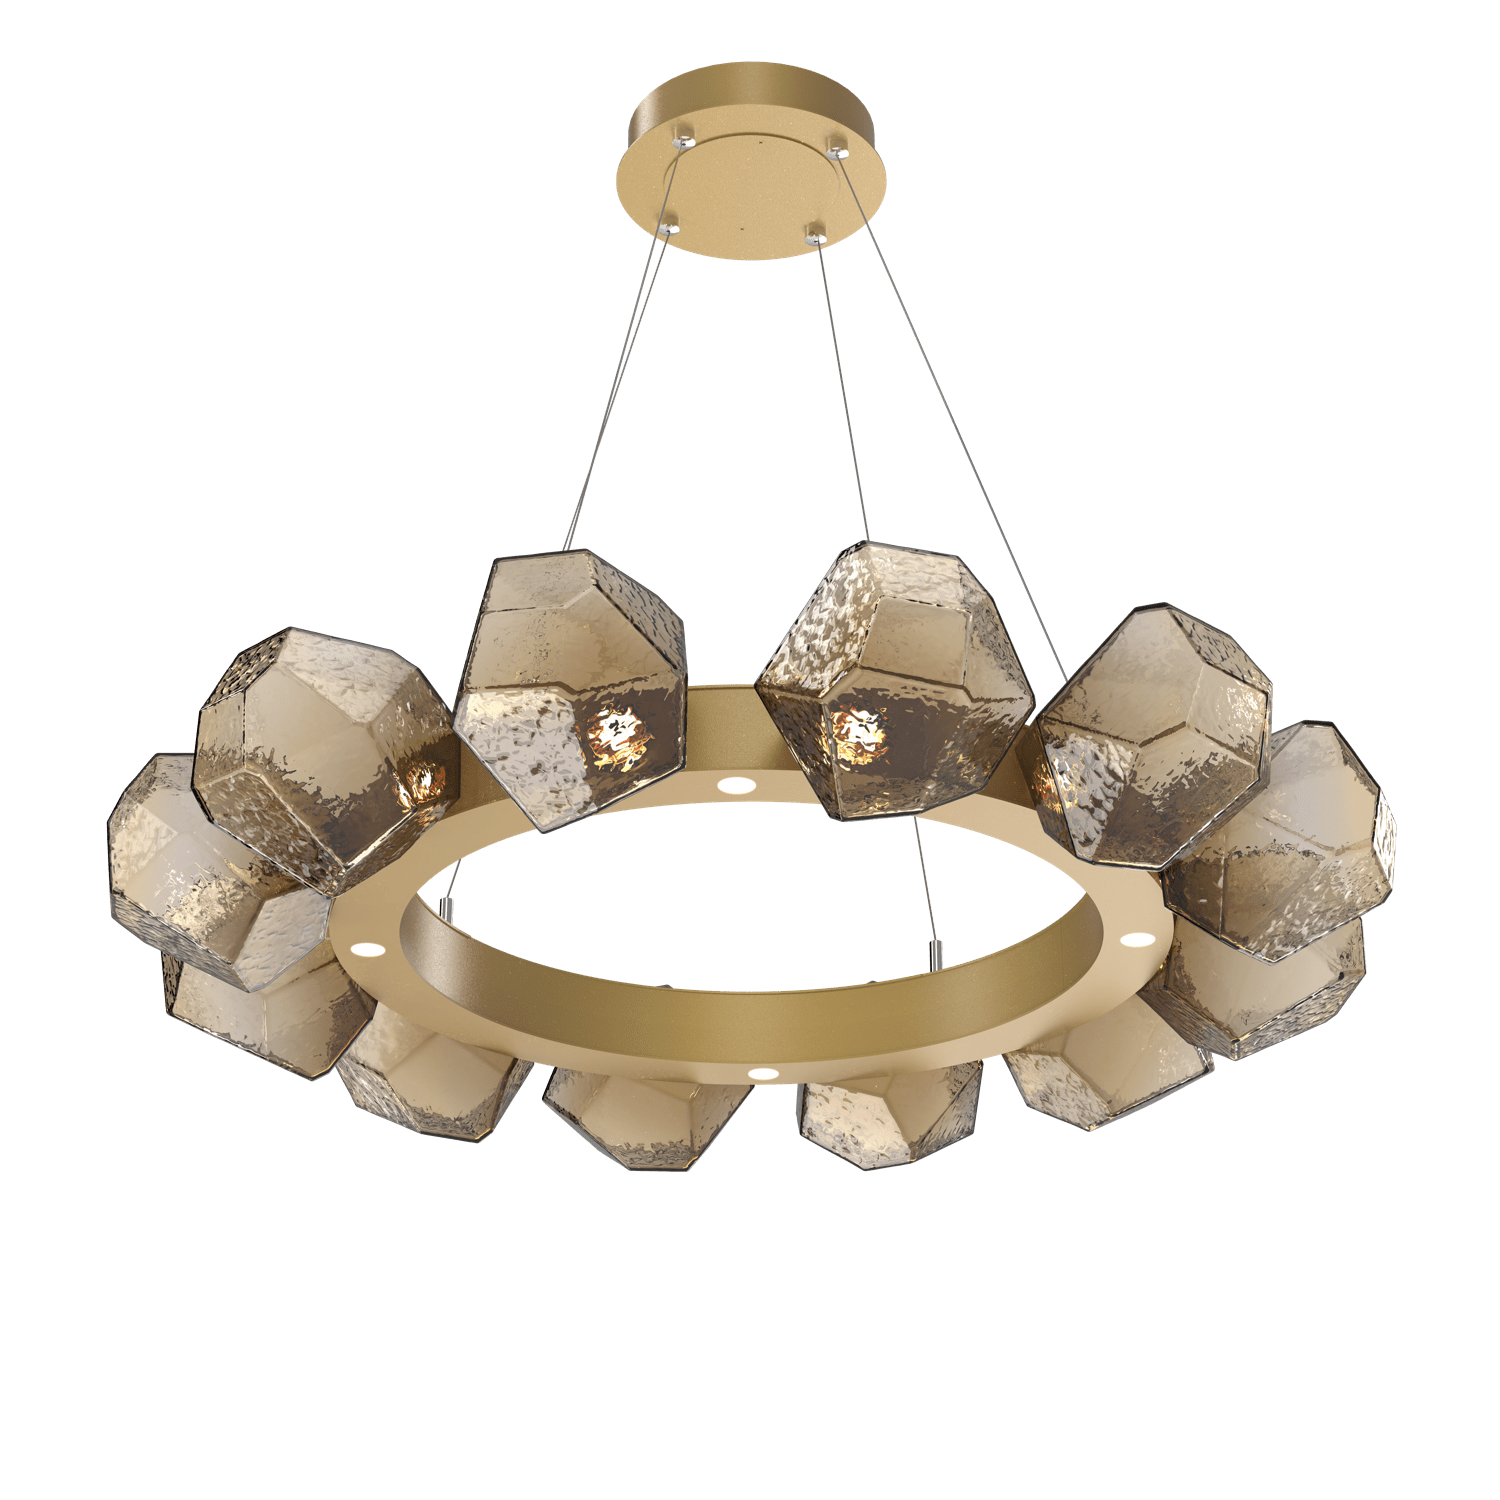 CHB0039-36-GB-B-Hammerton-Studio-Gem-36-inch-radial-ring-chandelier-with-gilded-brass-finish-and-bronze-blown-glass-shades-and-LED-lamping